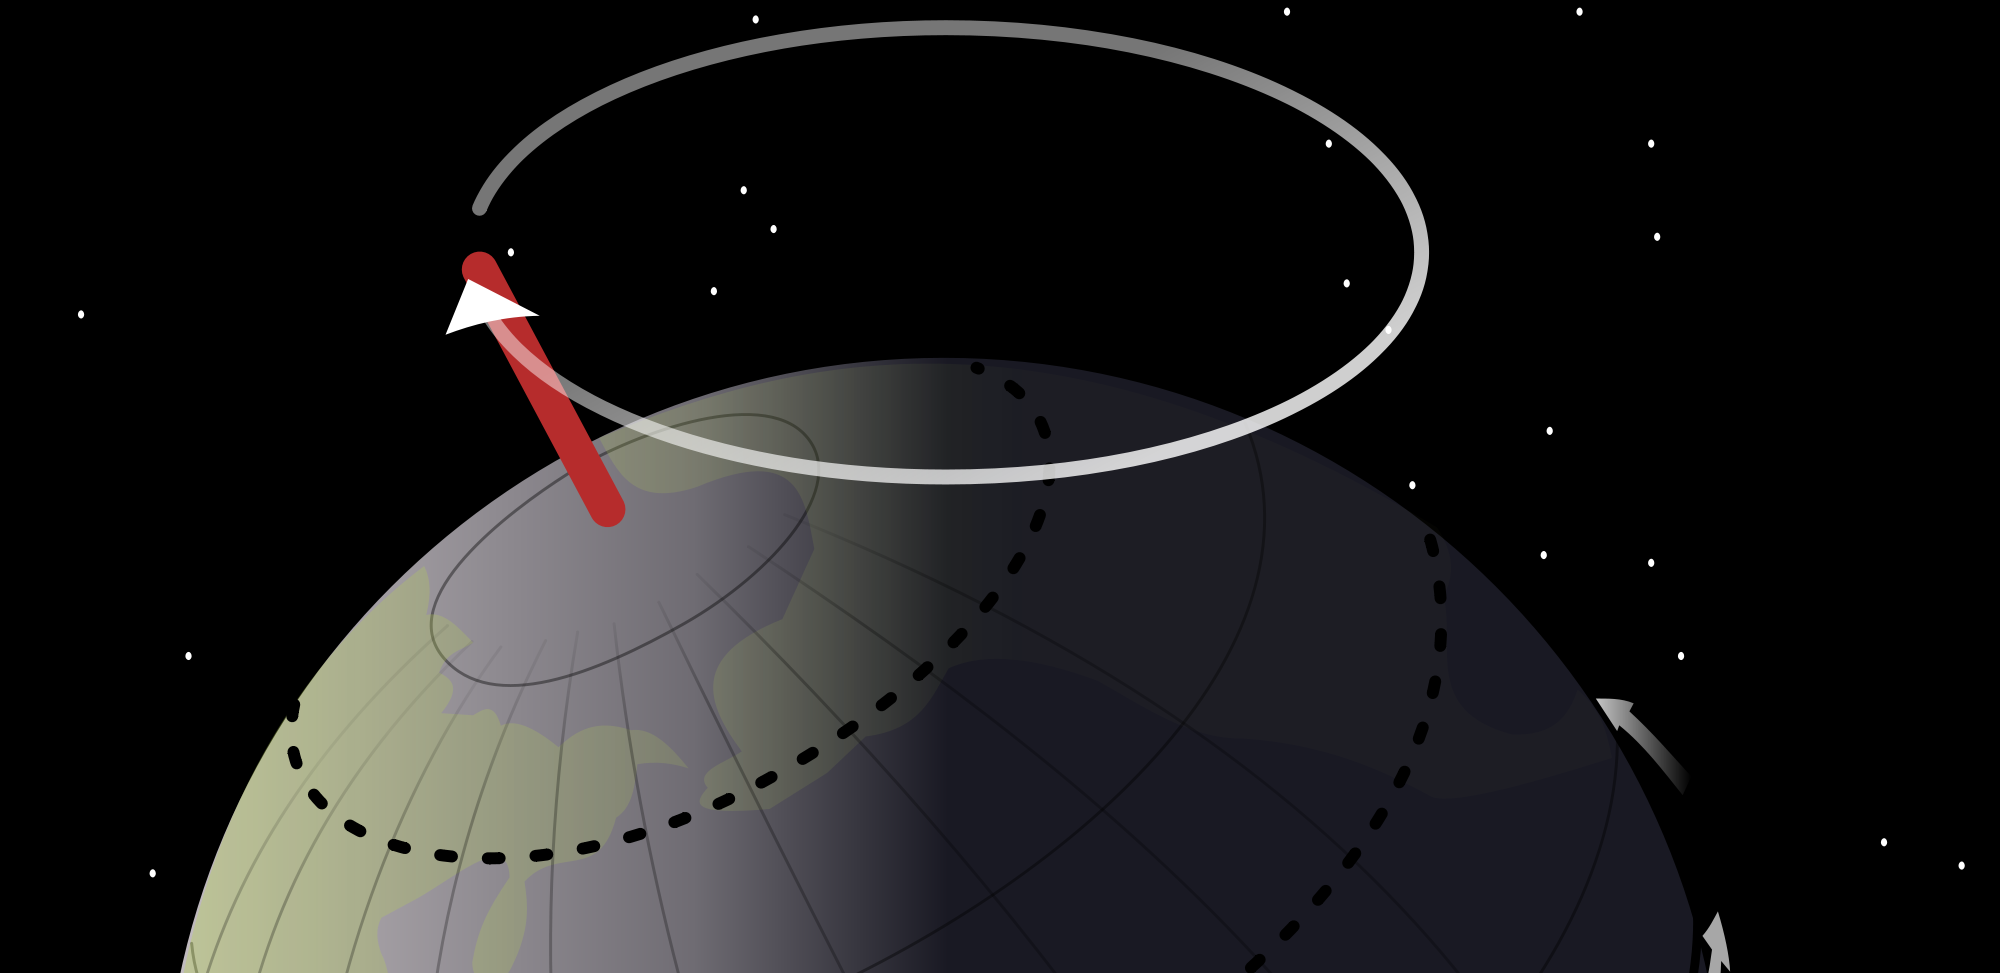 The Precession of the Equinoxes